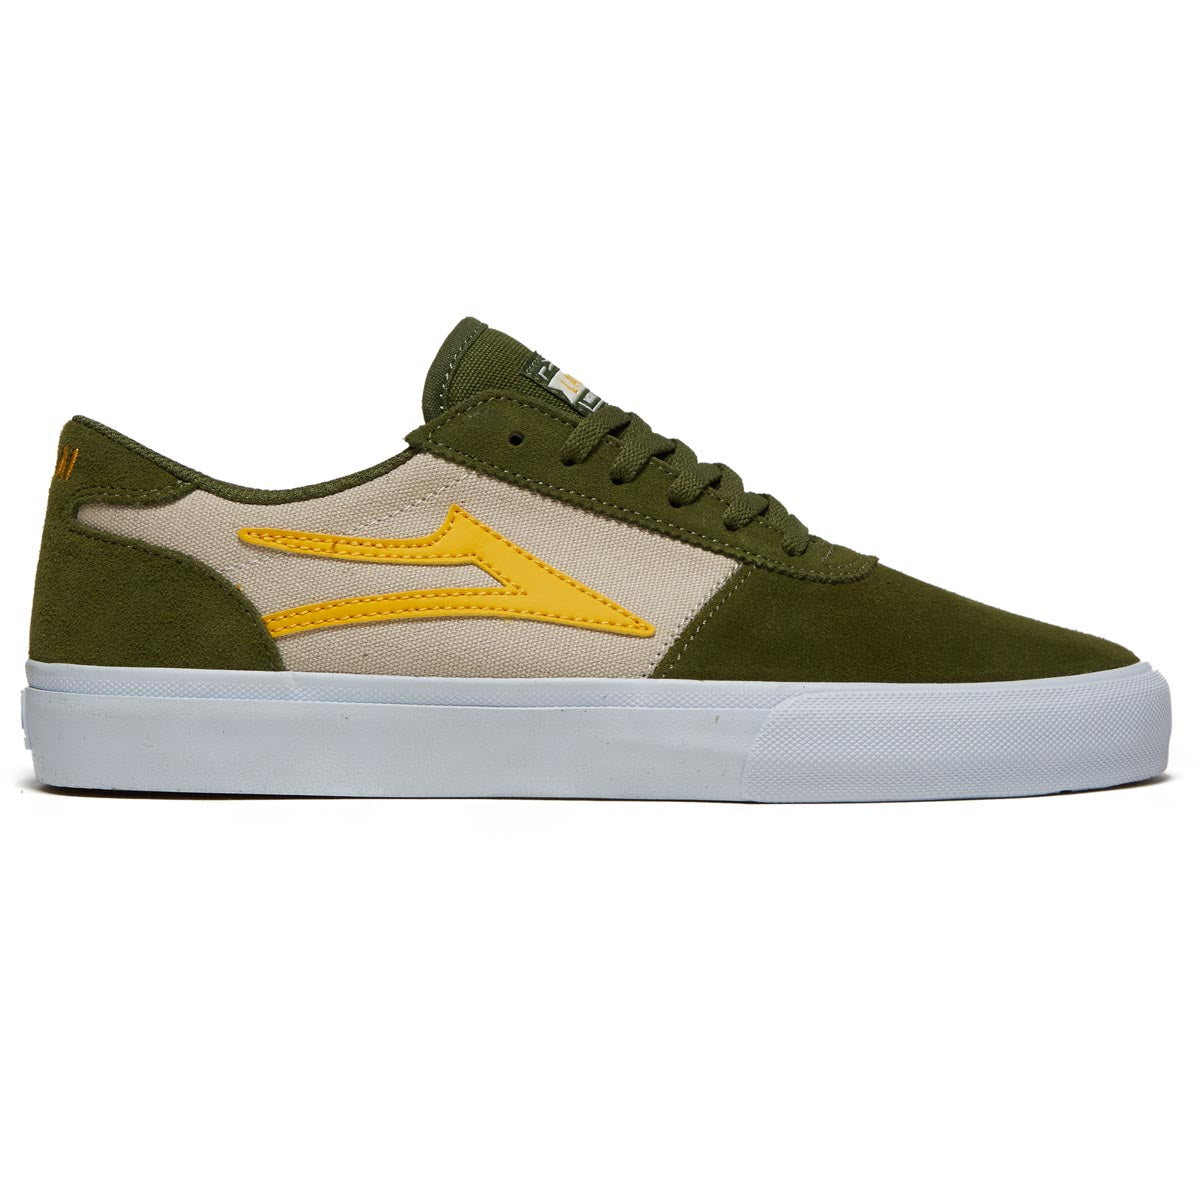 Lakai Manchester Shoes - Chive Suede image 1